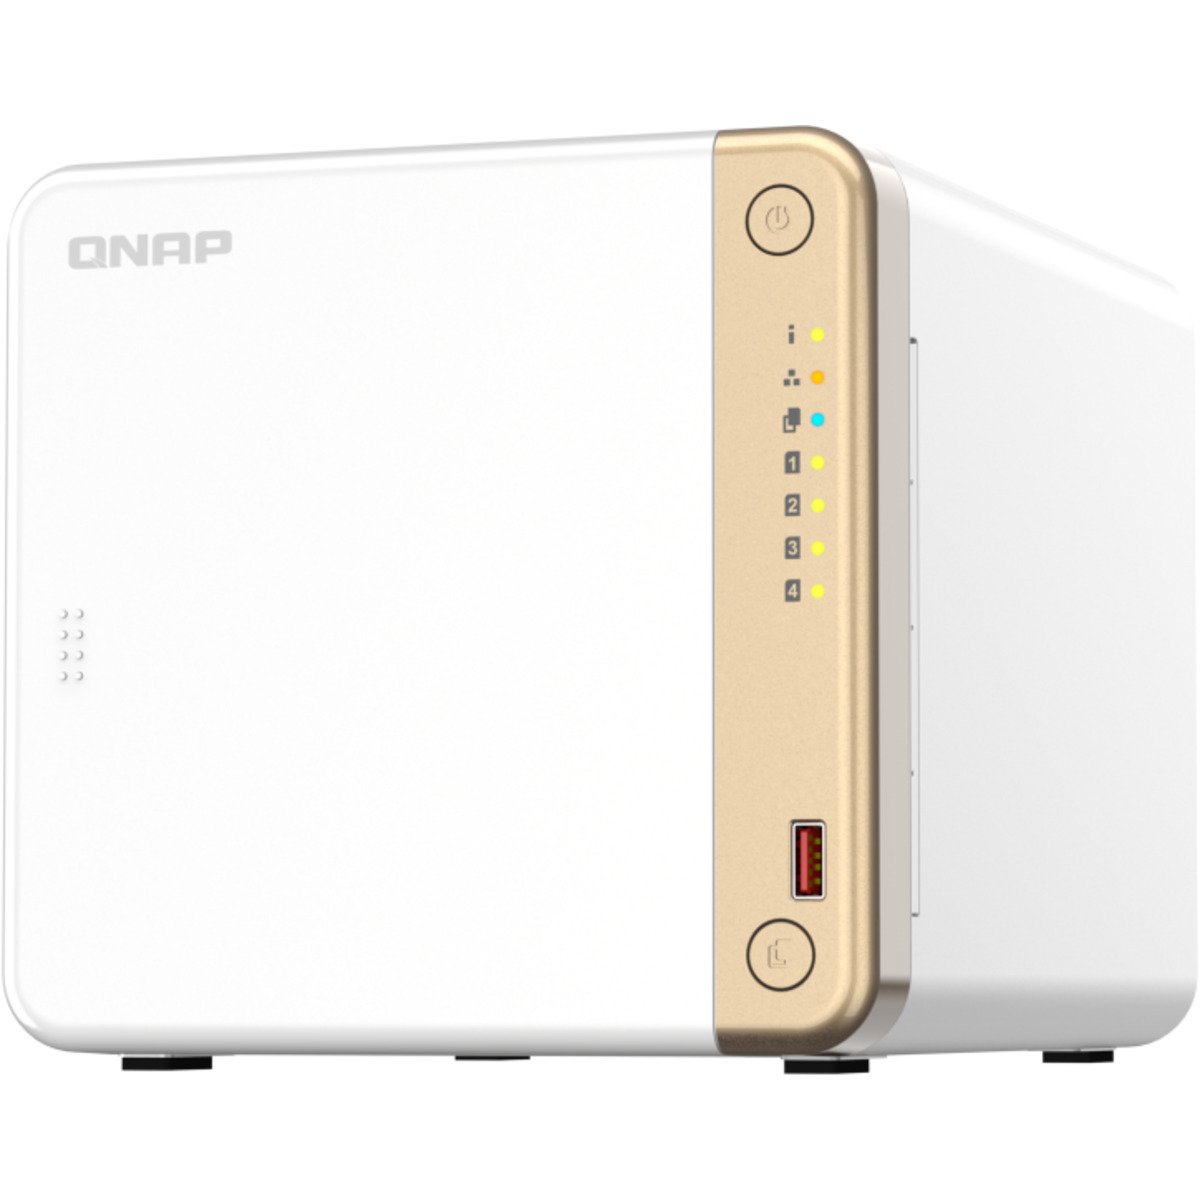 QNAP TS-462 48tb 4-Bay Desktop Multimedia / Power User / Business NAS - Network Attached Storage Device 4x12tb Seagate EXOS X18 ST12000NM000J 3.5 7200rpm SATA 6Gb/s HDD ENTERPRISE Class Drives Installed - Burn-In Tested - ON SALE TS-462